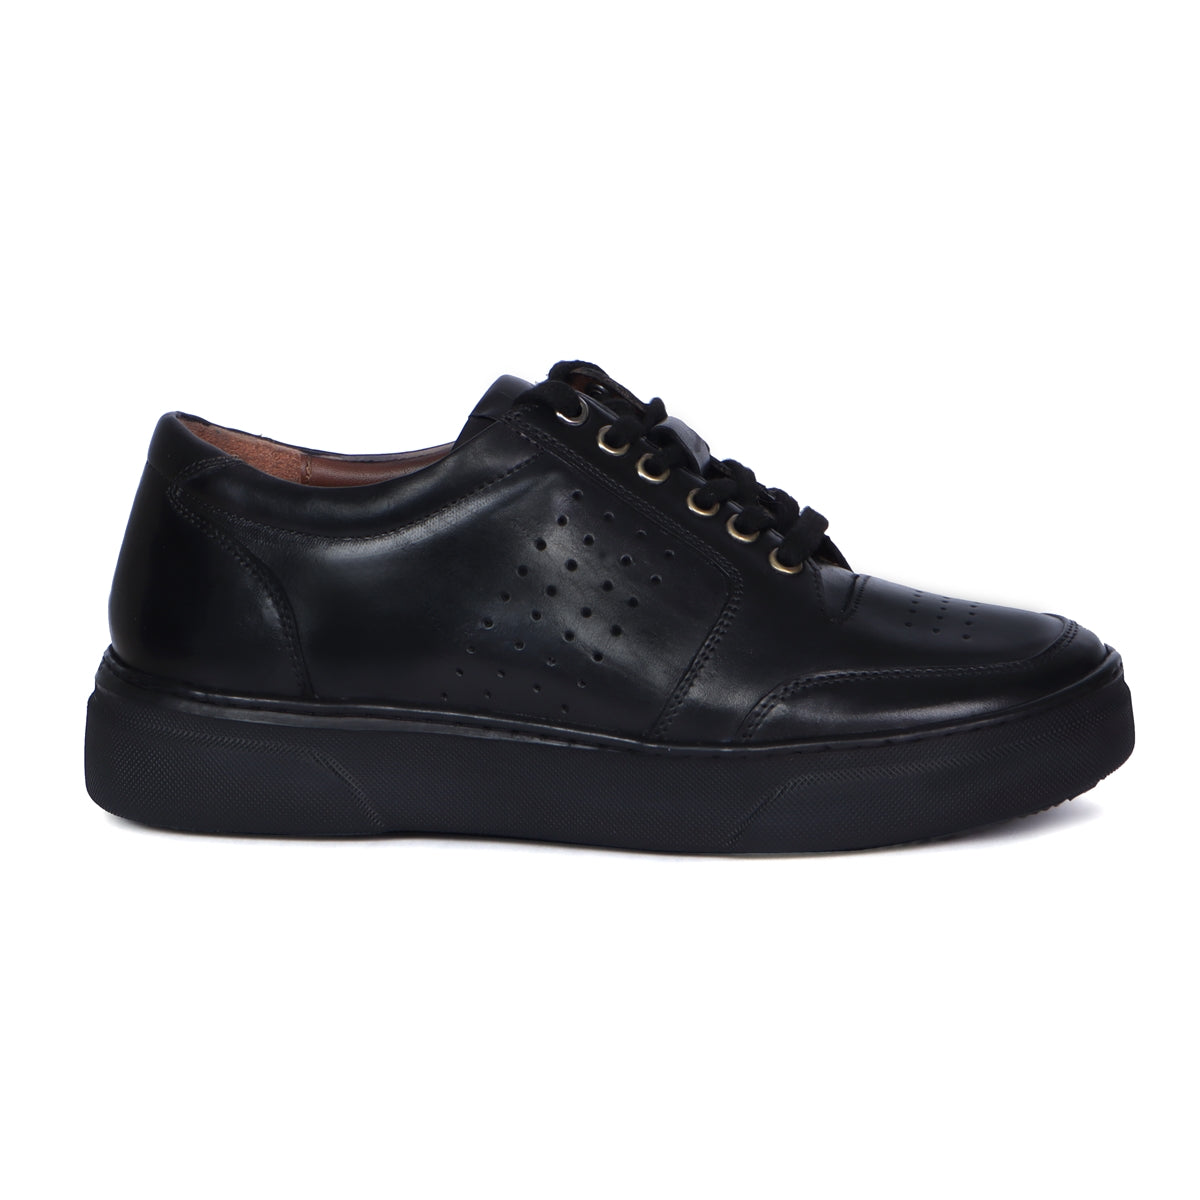 Black Leather Low Top Perforated Sneakers